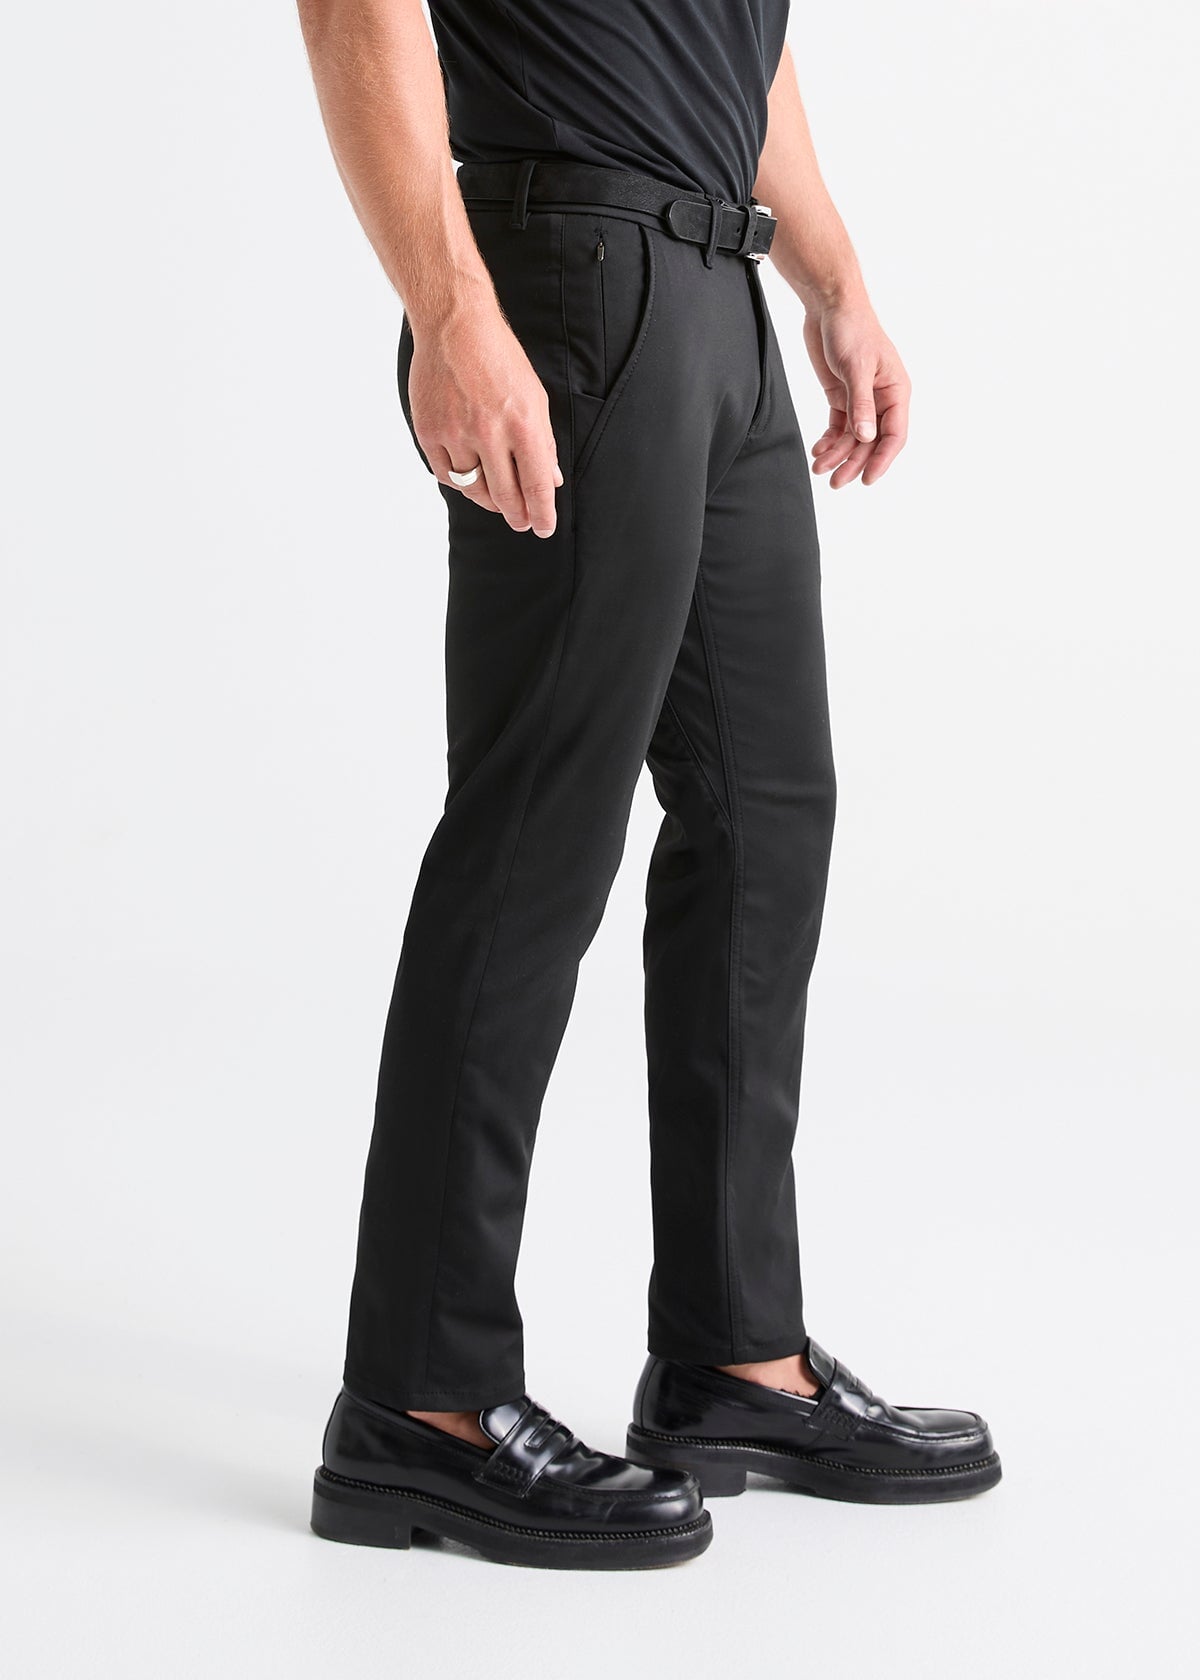 Shop for 4 Way Stretch Solid Comfort Pants for men Online in India |  Cultsport